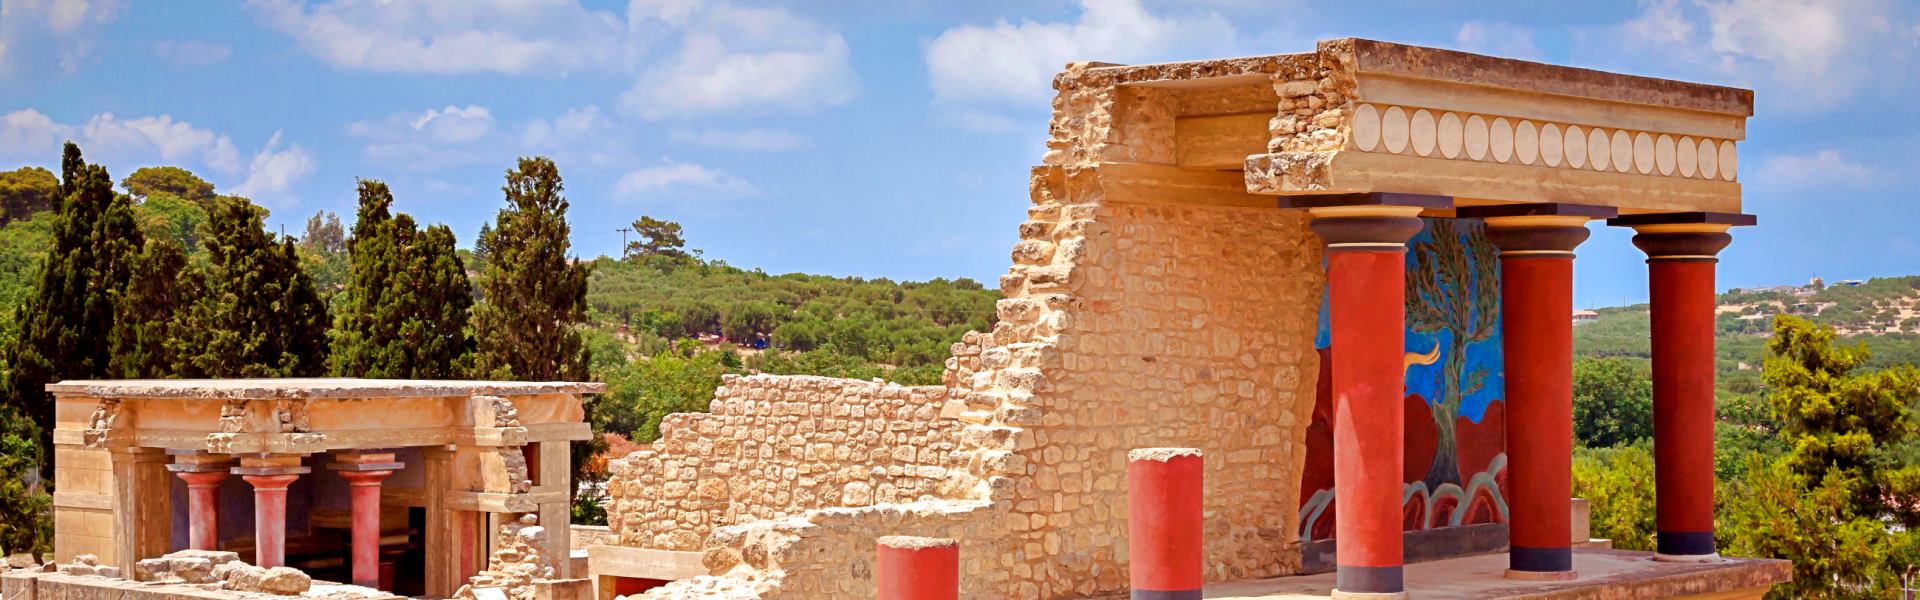 Knossos palace at Crete Greece Knossos Palace is the largest Bronze Age archaeological site on Crete and the ceremonial and political centre of the Minoan civilization and culture